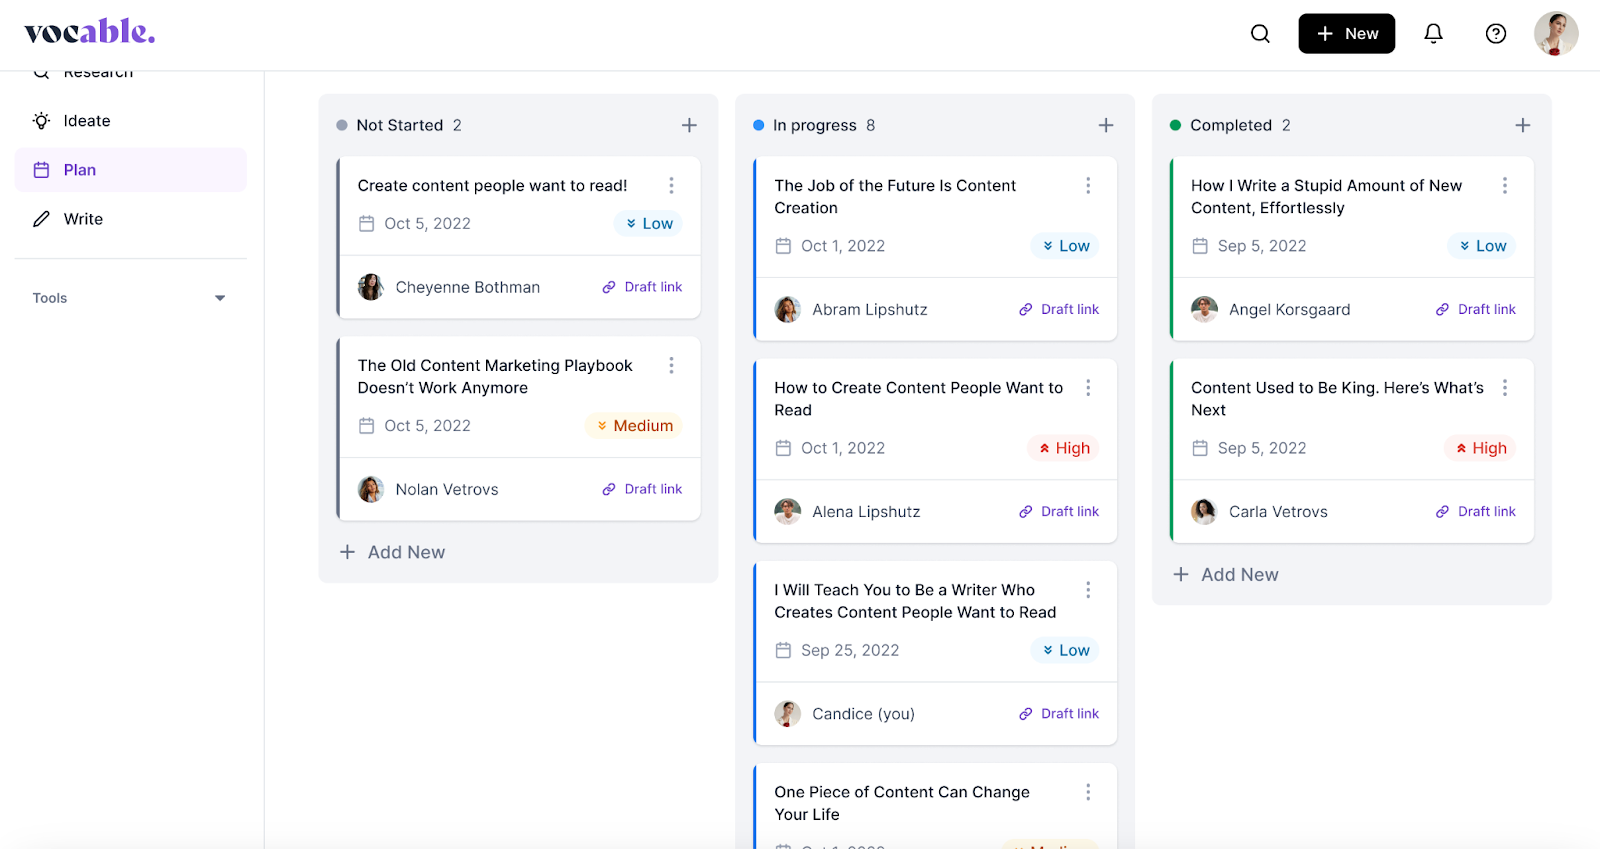 Screenshot of Vocable's AI Powered Content Planner 